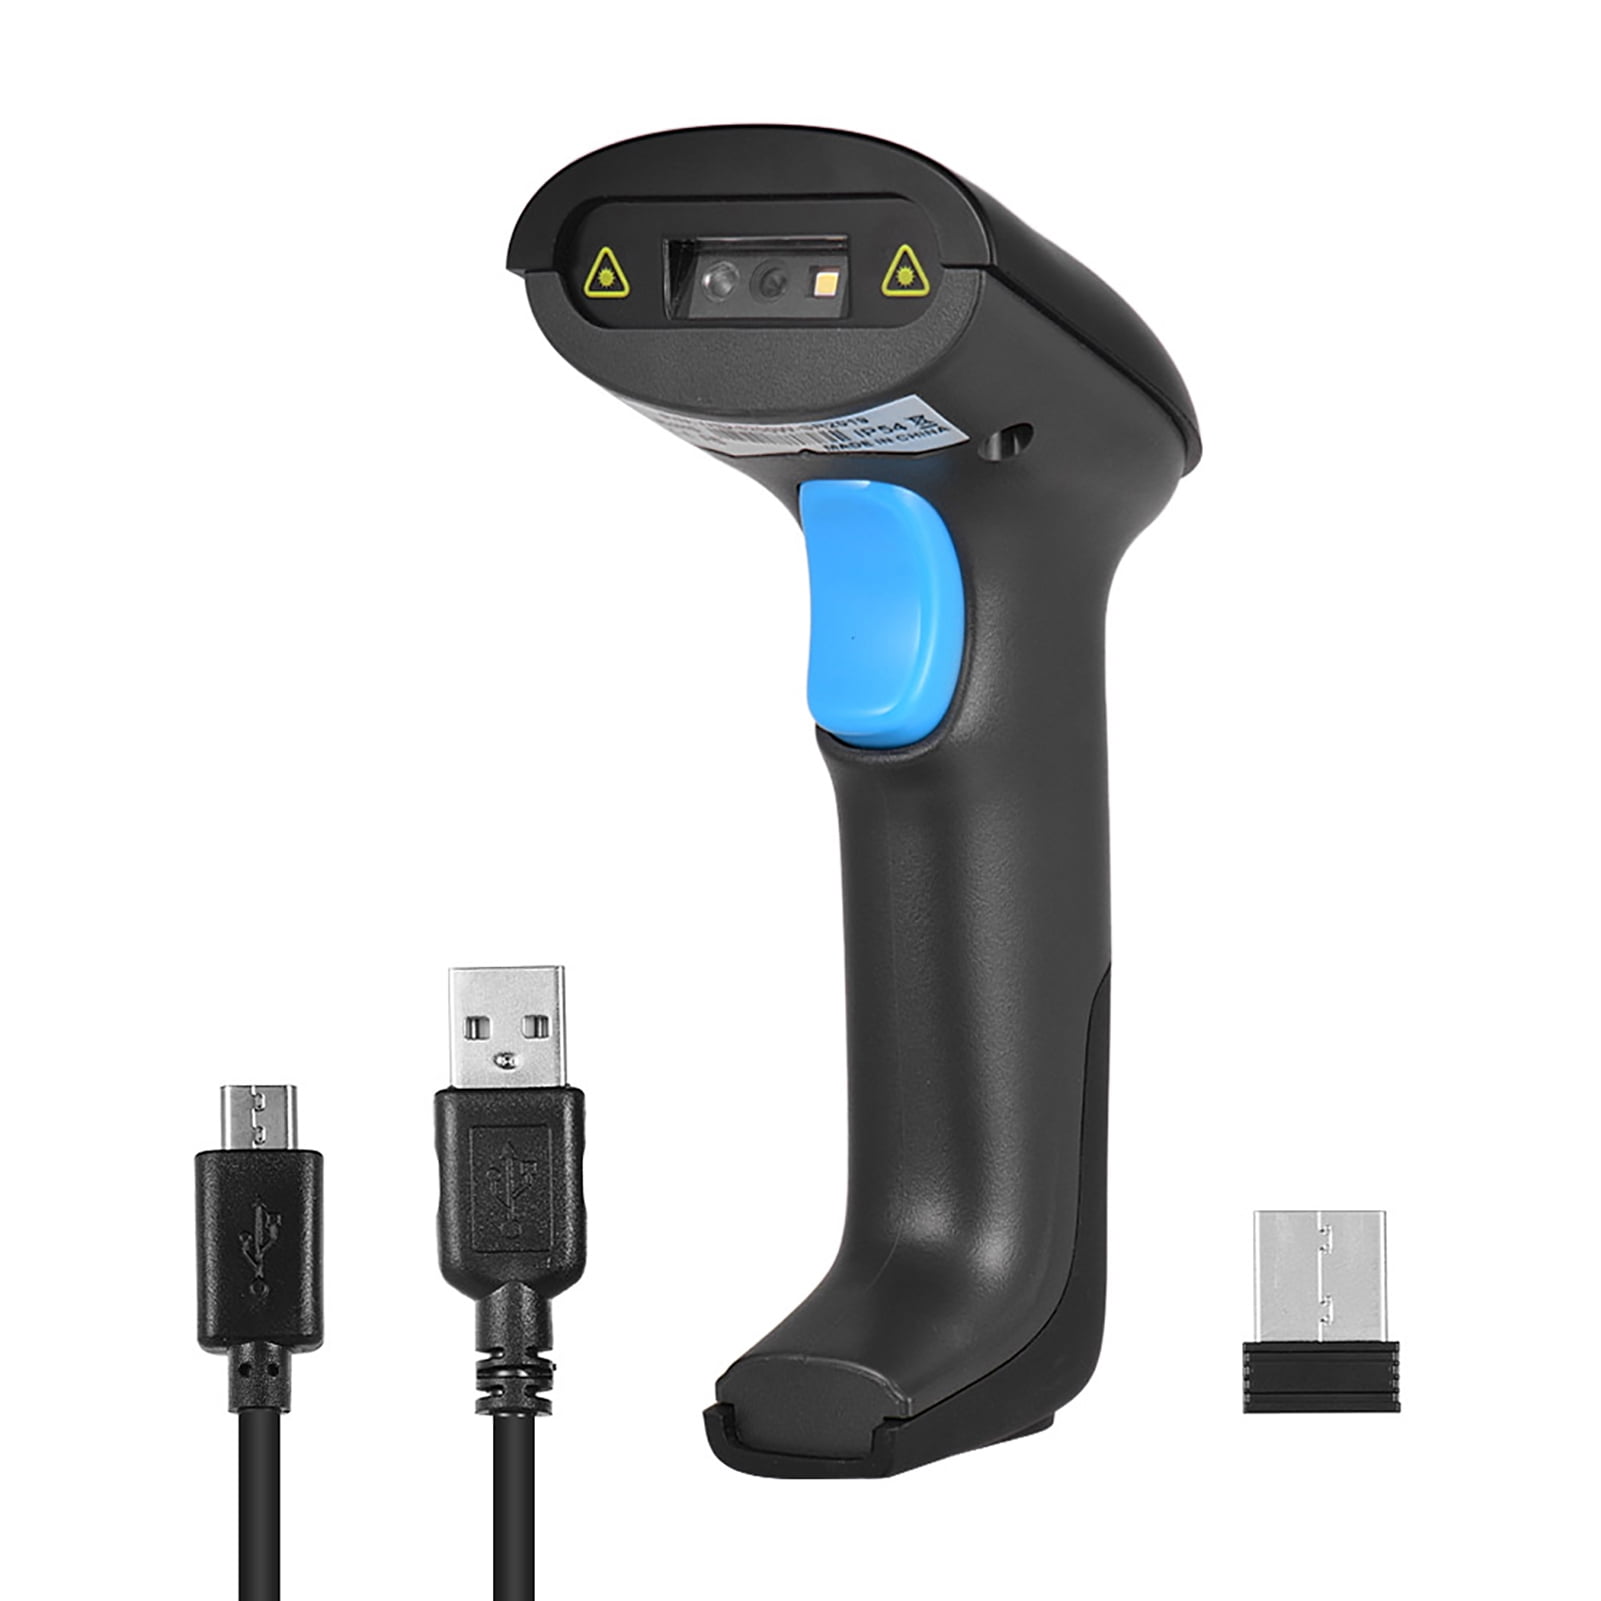 Compatible with Common System Barcode Scanner HooToo 2.4G Wireless Handheld Bar Code Scanner USB Barcode Reader with 32-bit Decoder Support Wired Connect 